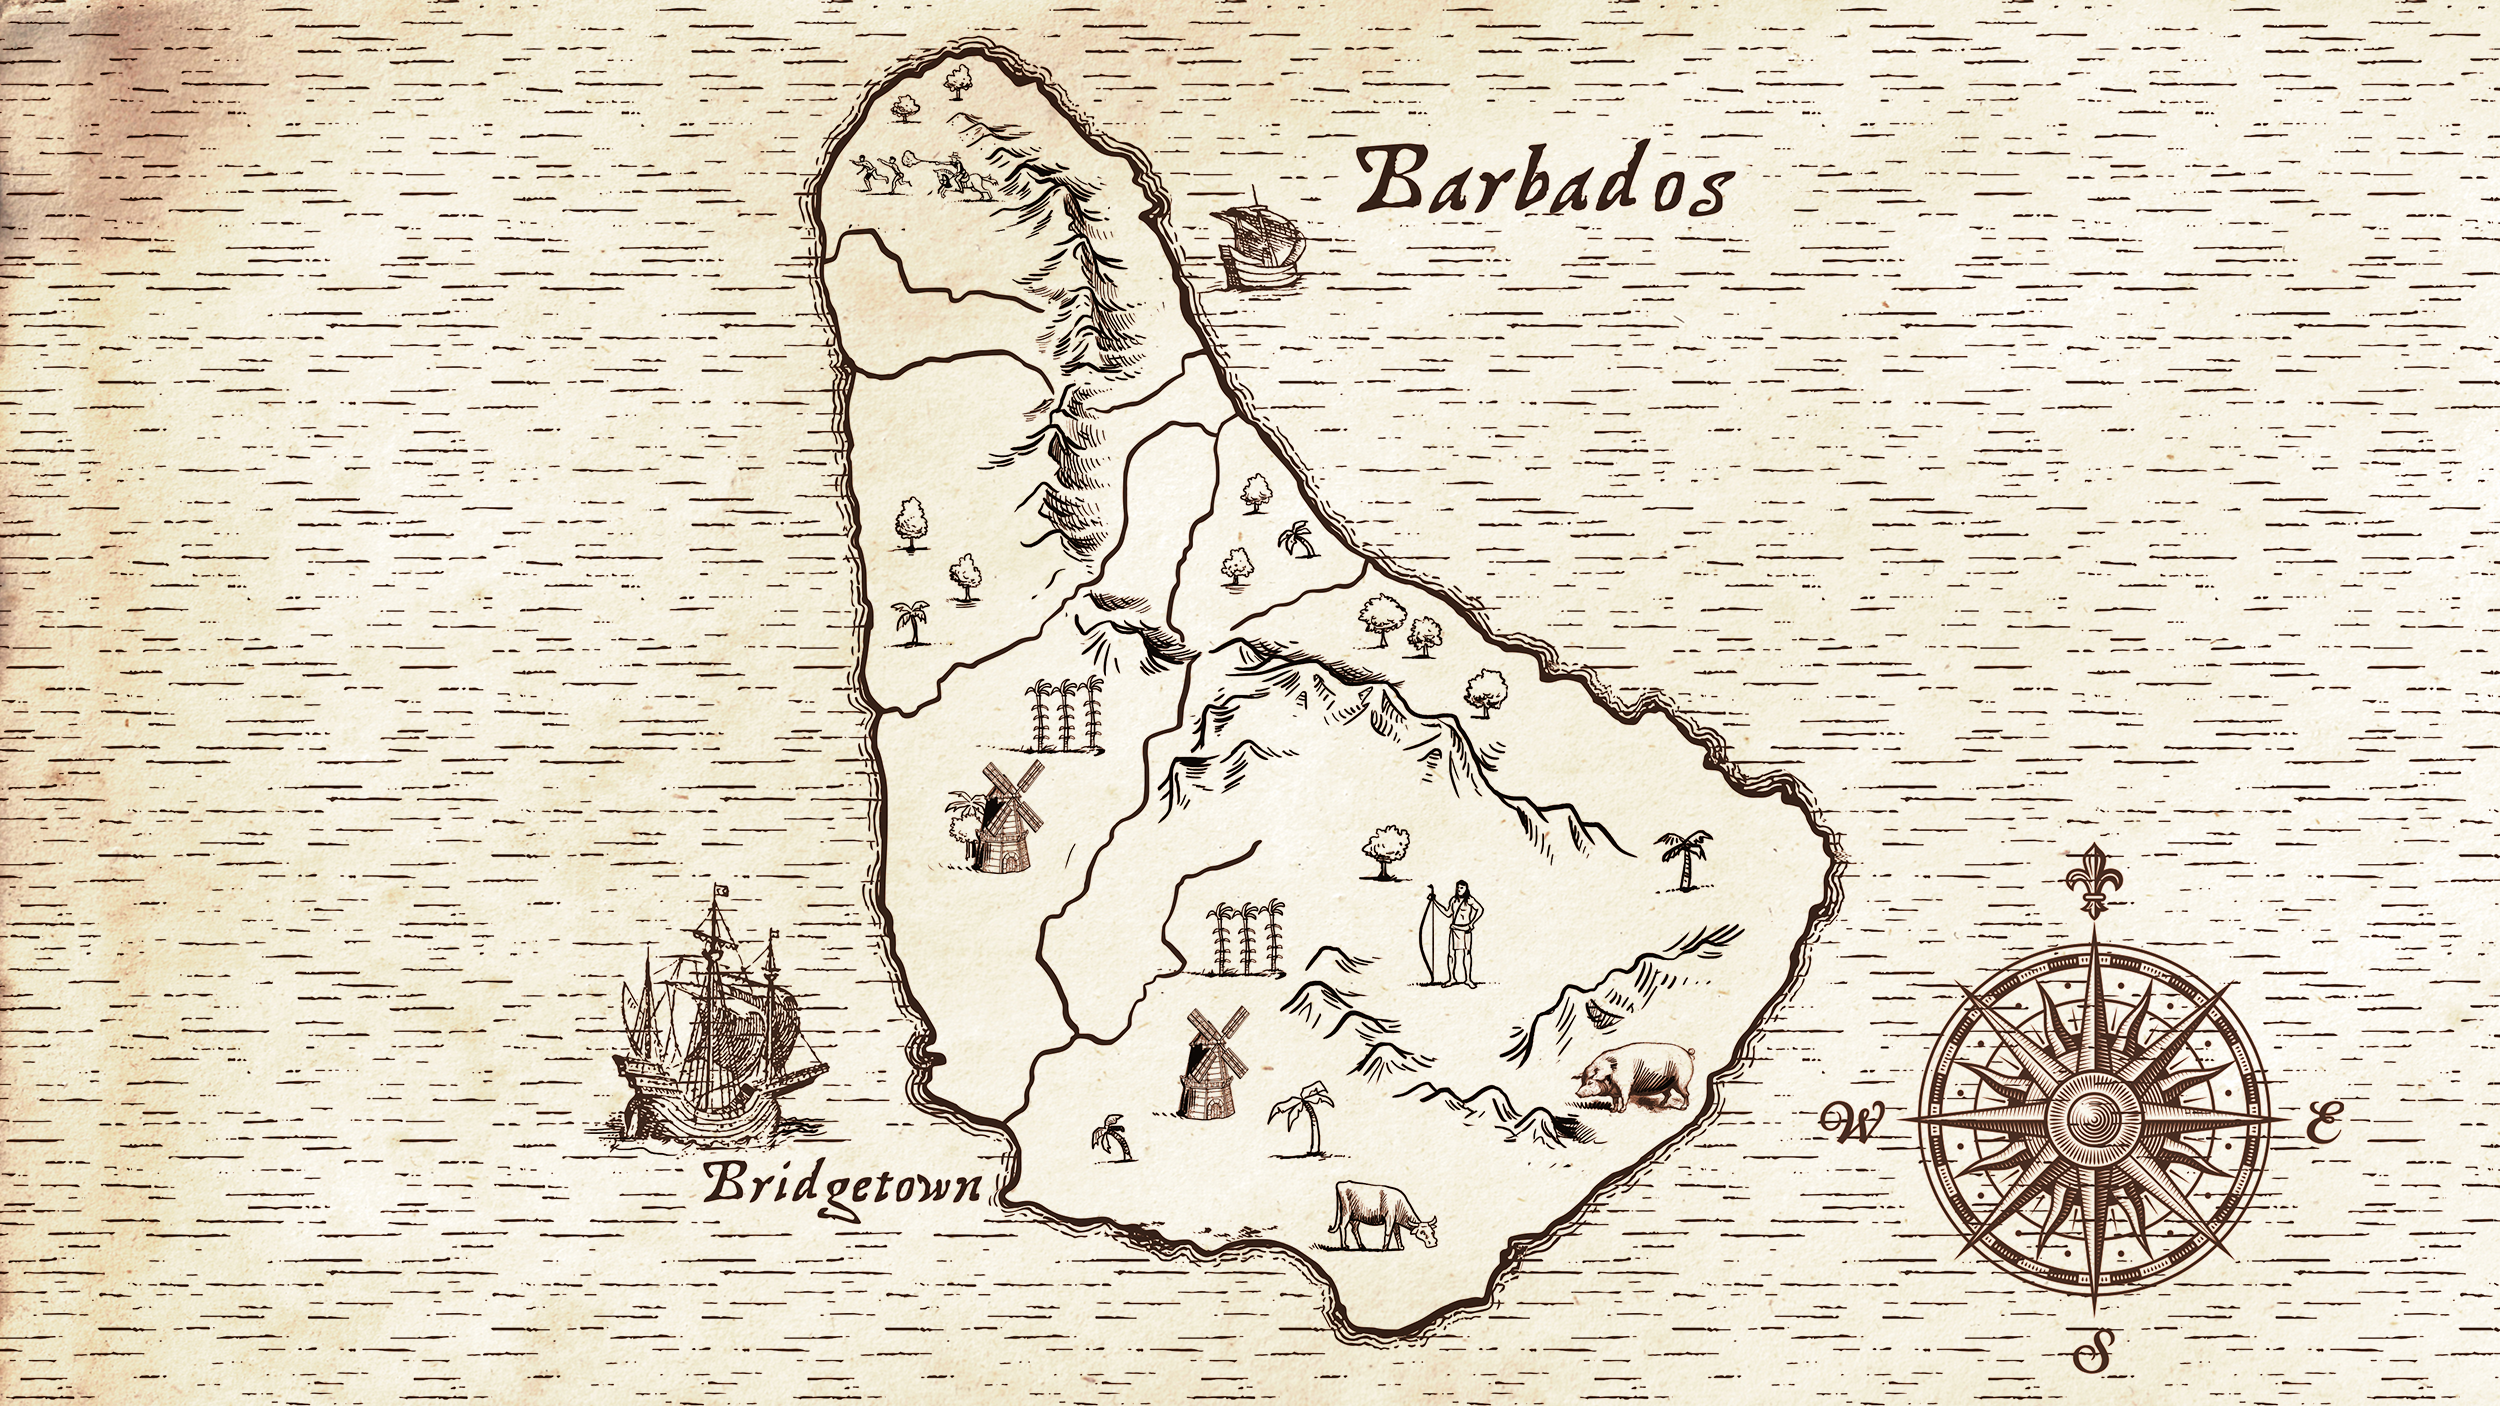 A comprehensive history of Barbados and its influence on a place 2,000 miles away: the Carolinas